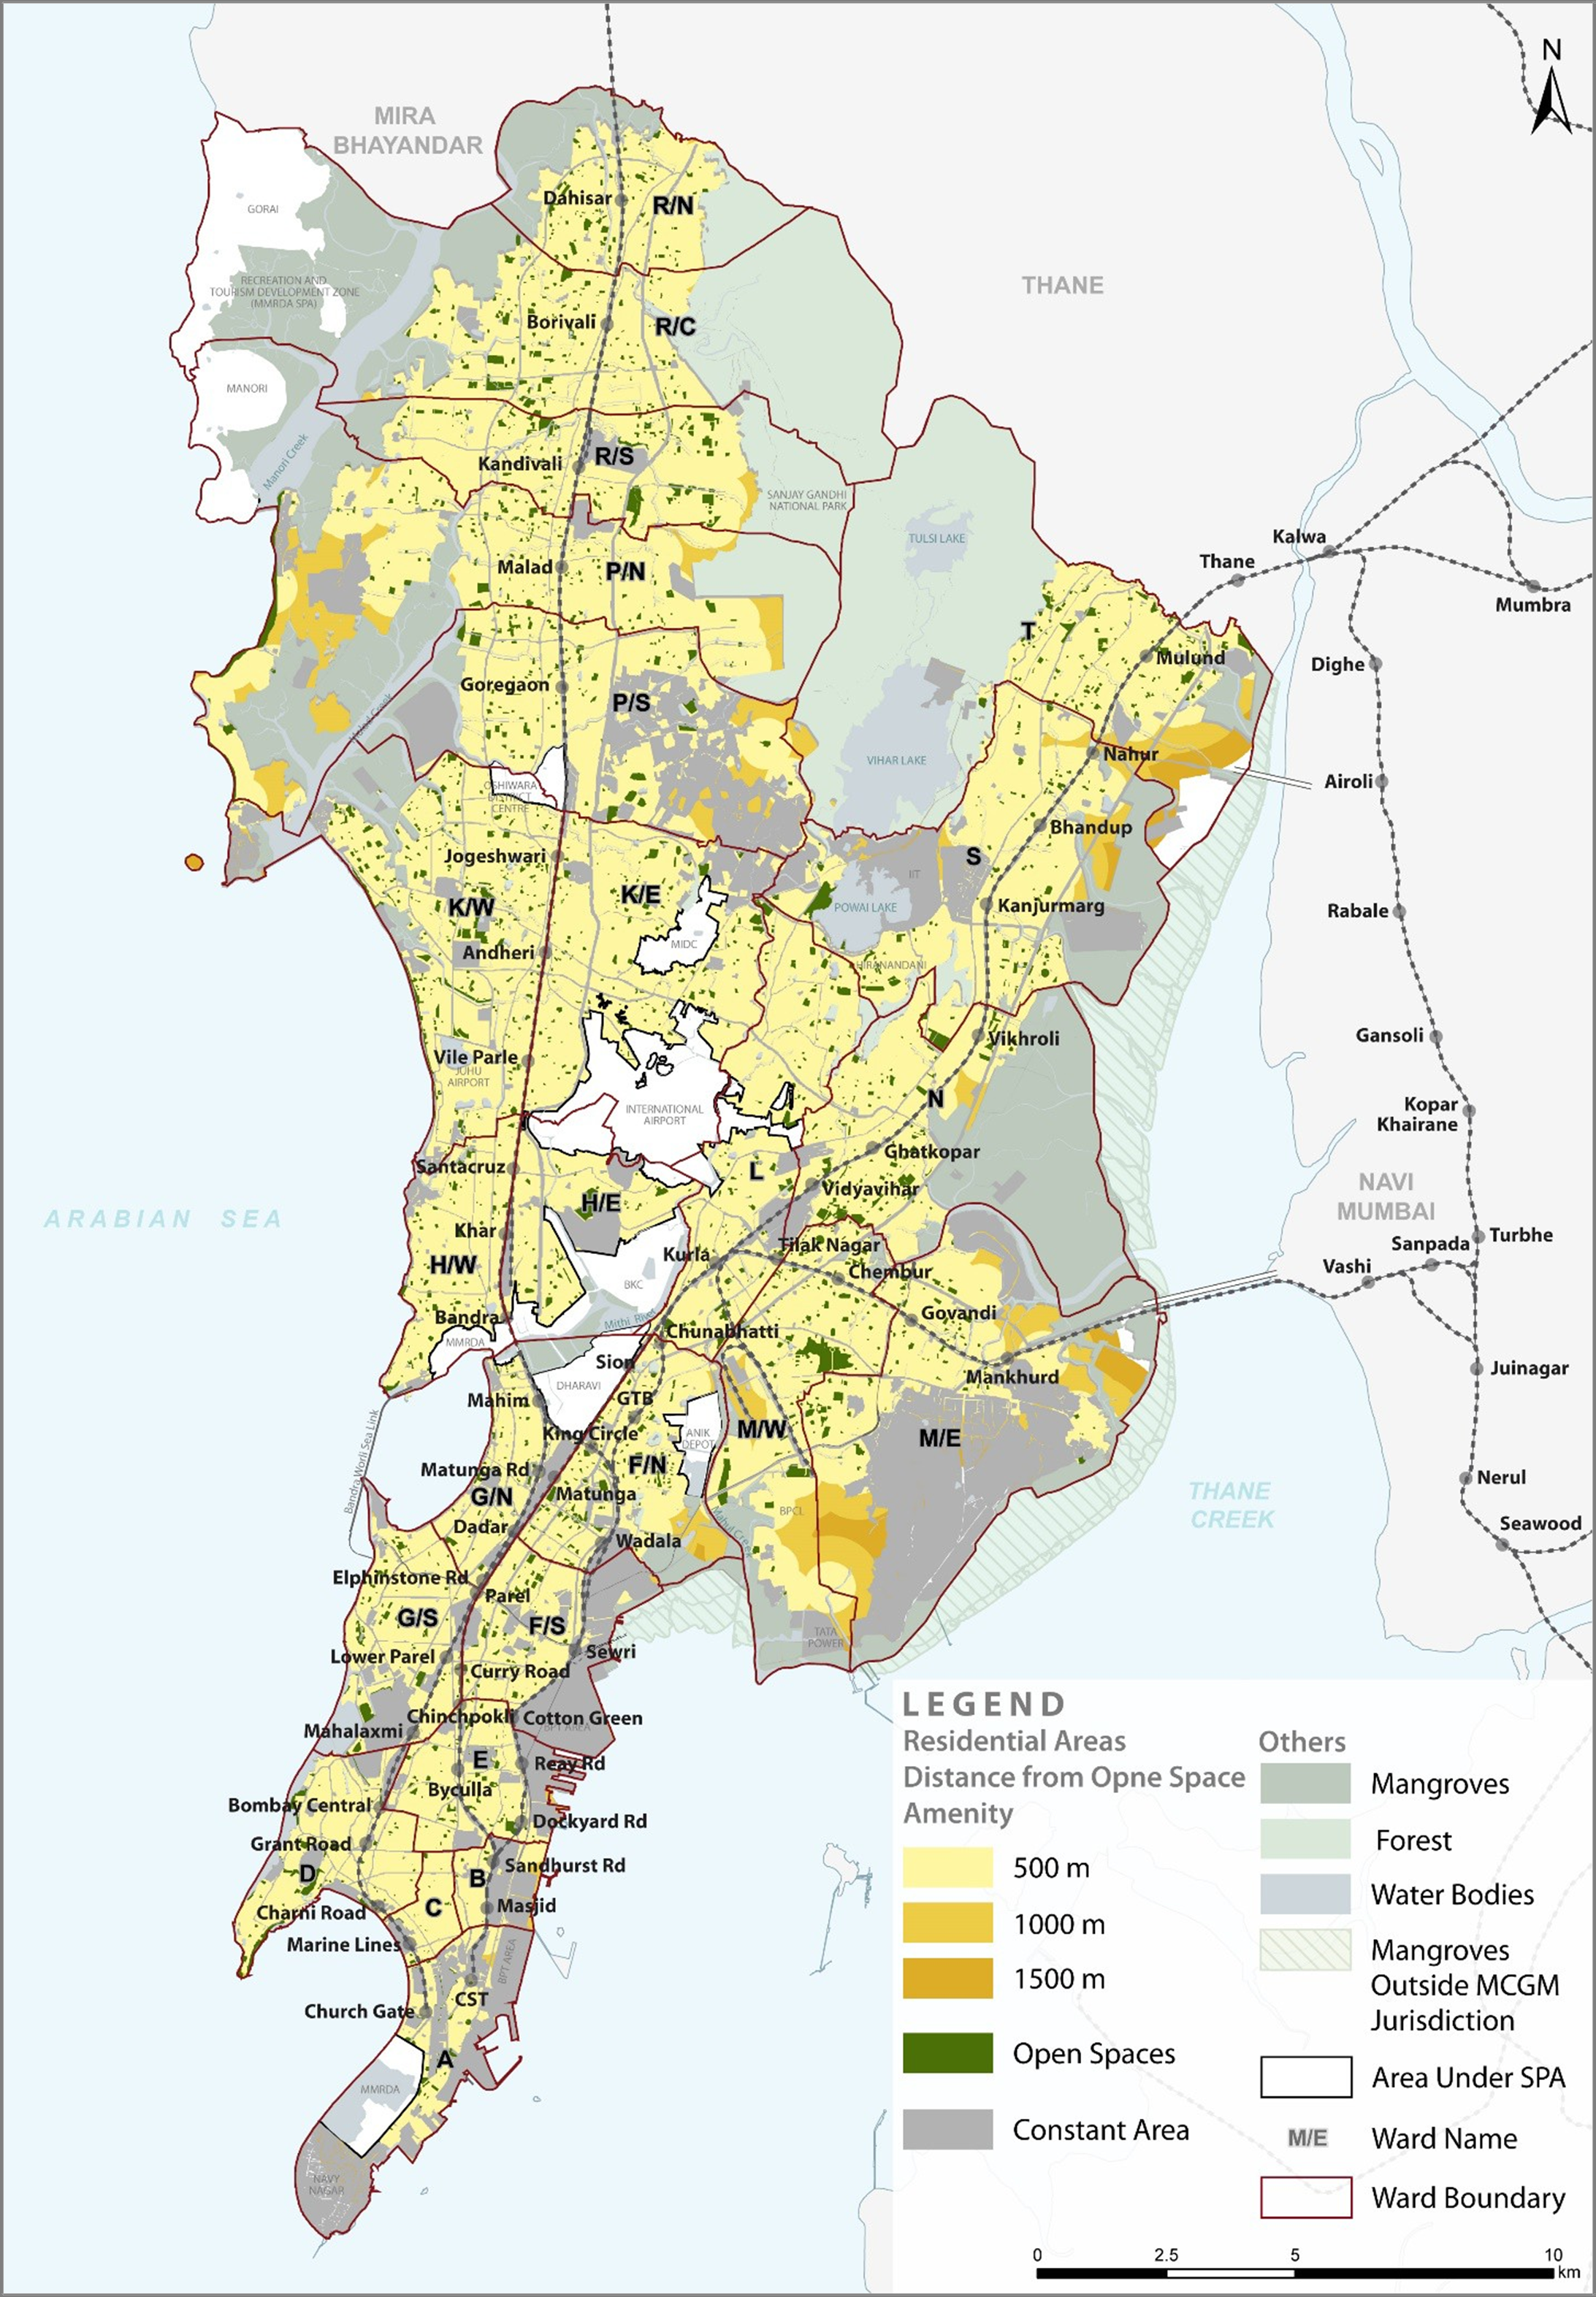 Map 2: Accessibility and spatial distribution of open space in Mumbai, highlighting M/East ward. Map Credit: